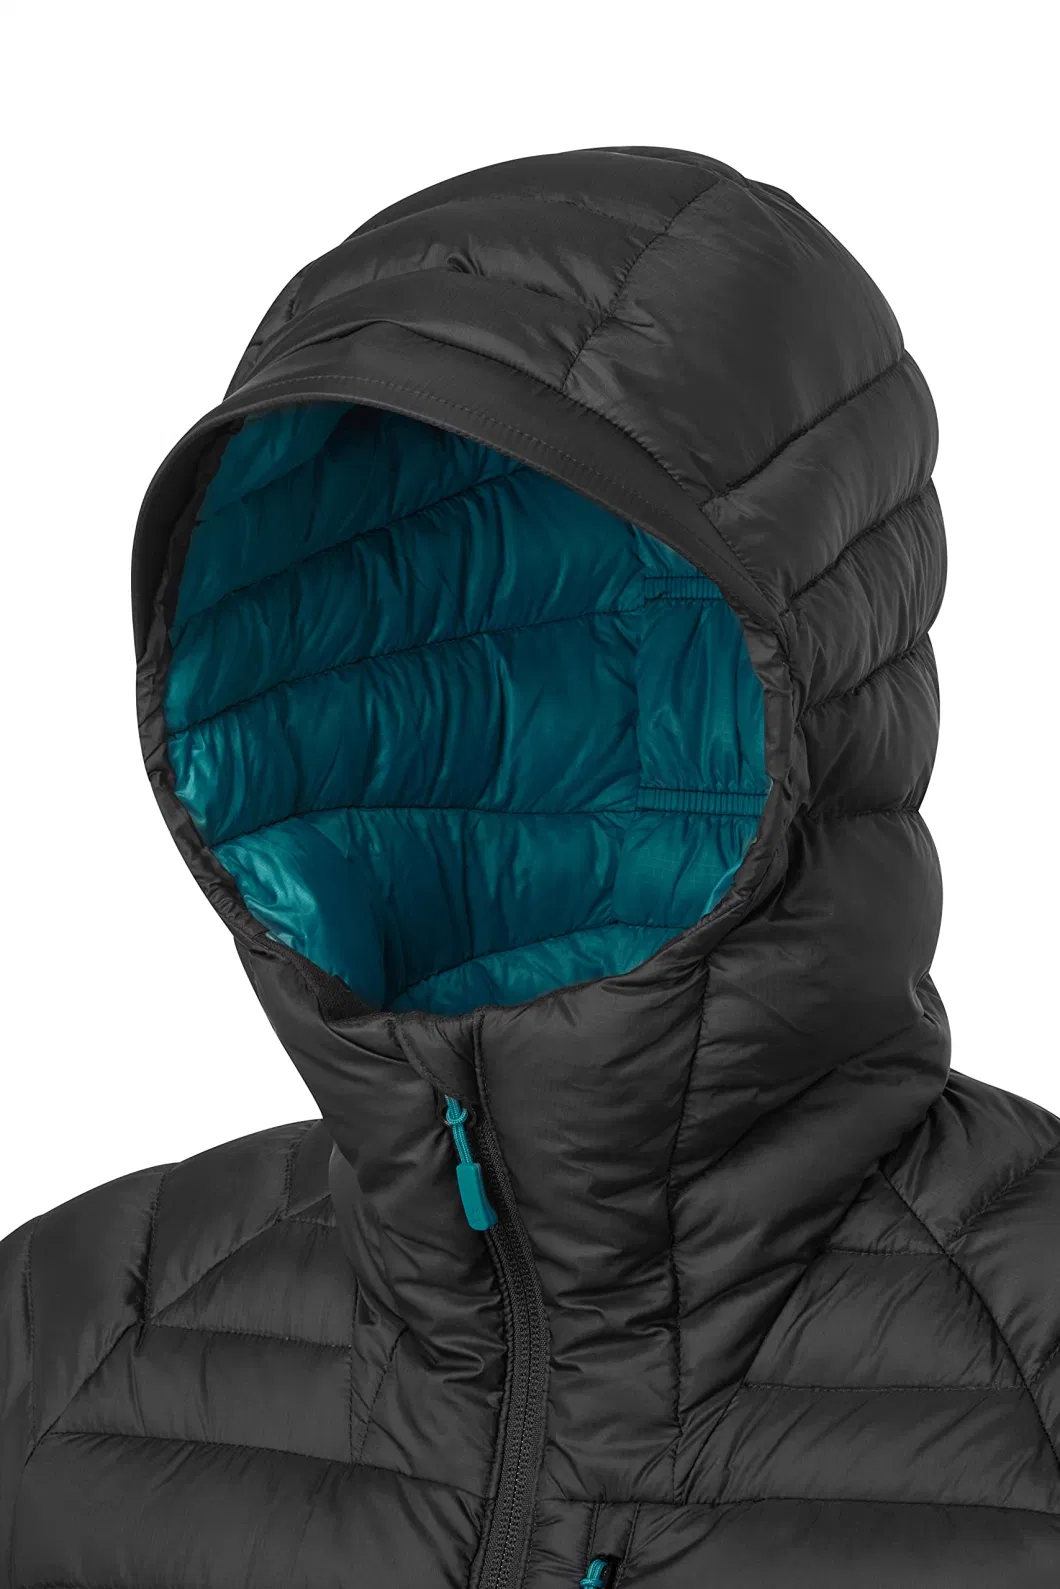 Asiapo China Factory Women&prime;s Black Down Jacket for Hiking/ Climbing/ Skiing